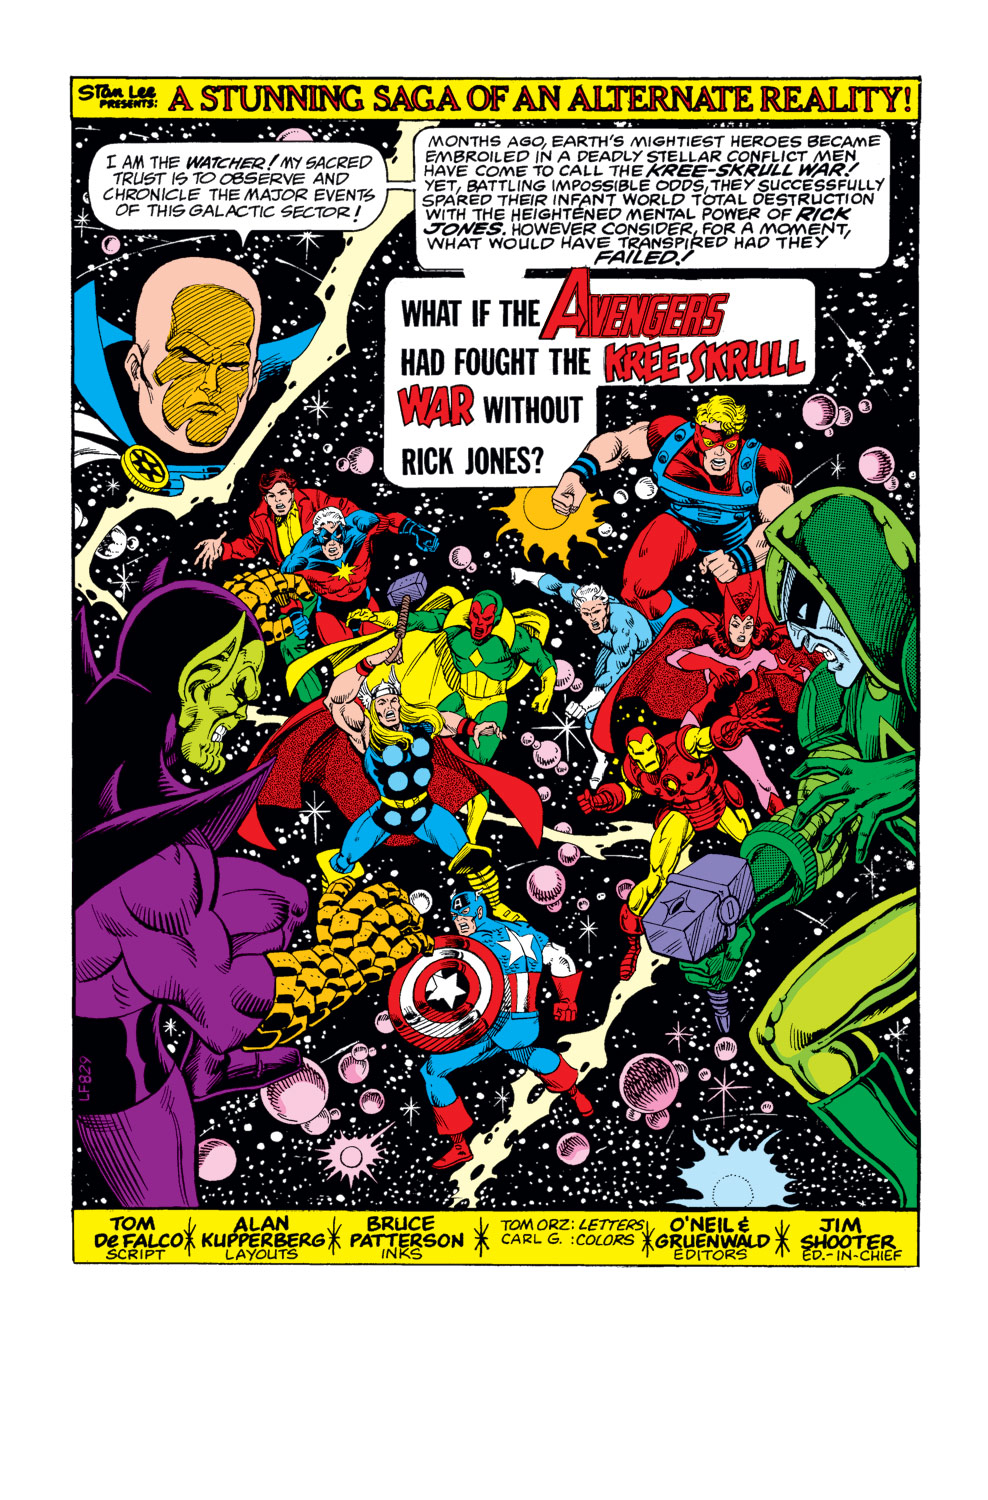 <{ $series->title }} issue 20 - The Avengers fought the Kree-Skrull war without Rick Jones - Page 2